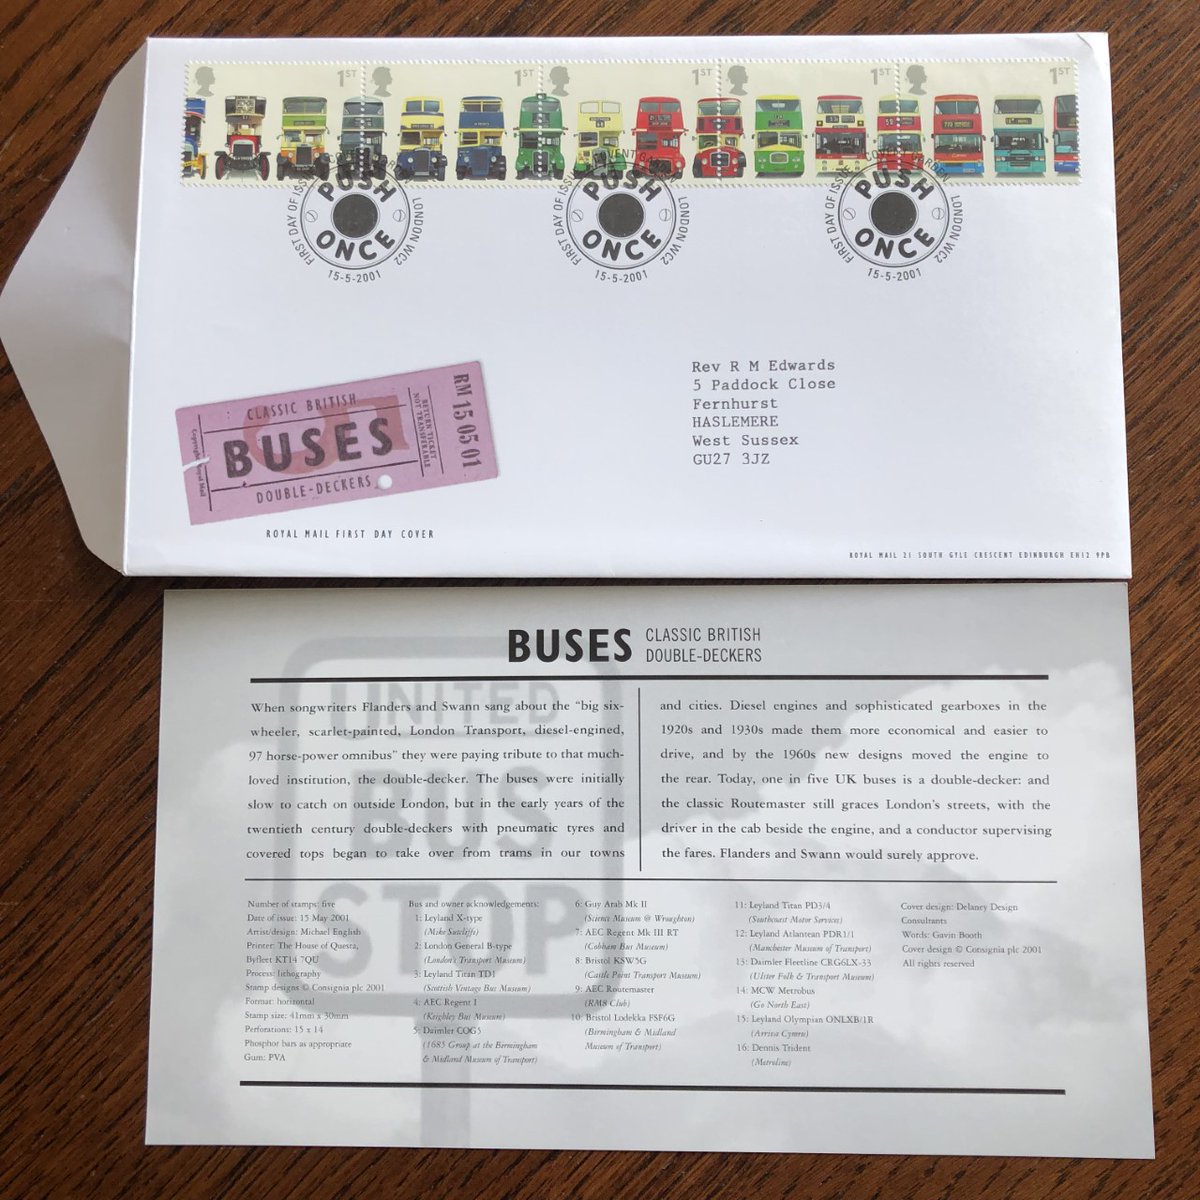 2001 Buses Stamp Pack, Stamp Set, Mini Stamp Sheet, & First Day Cover. #buses #londonbuses #leylandbus #leylandbuses #bristollodekka #aecregent #daimler #daimlerbuses #stampcollectors #collectingstamps #stampcollections #doubledeckers #fdc #firstdaycovers